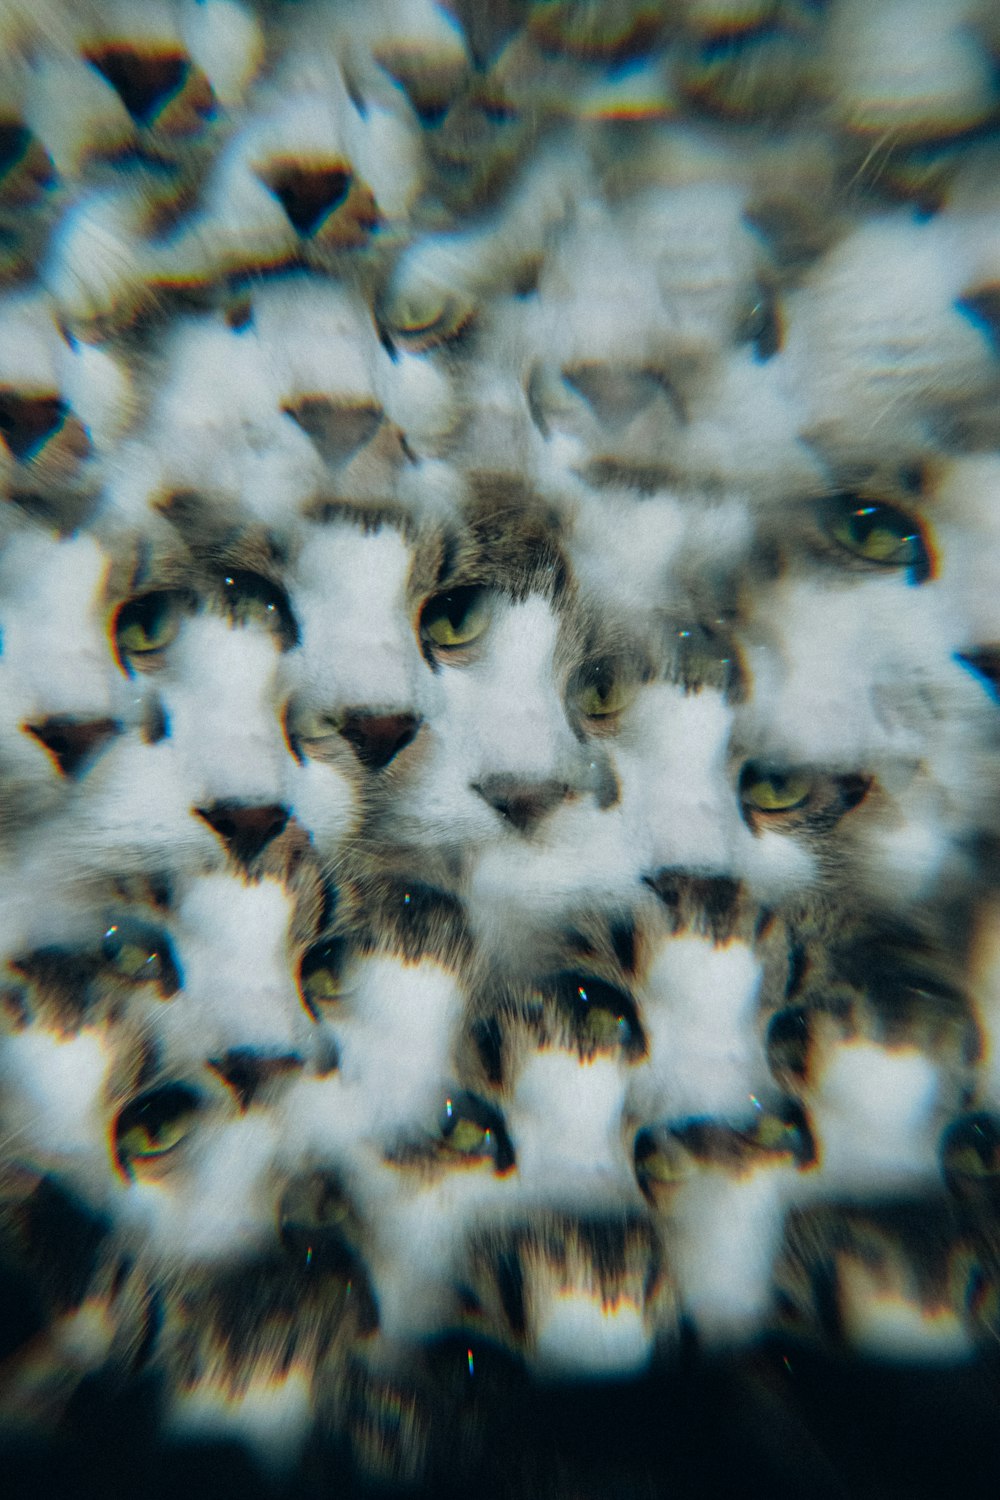 a close up of a cat's face and eyes